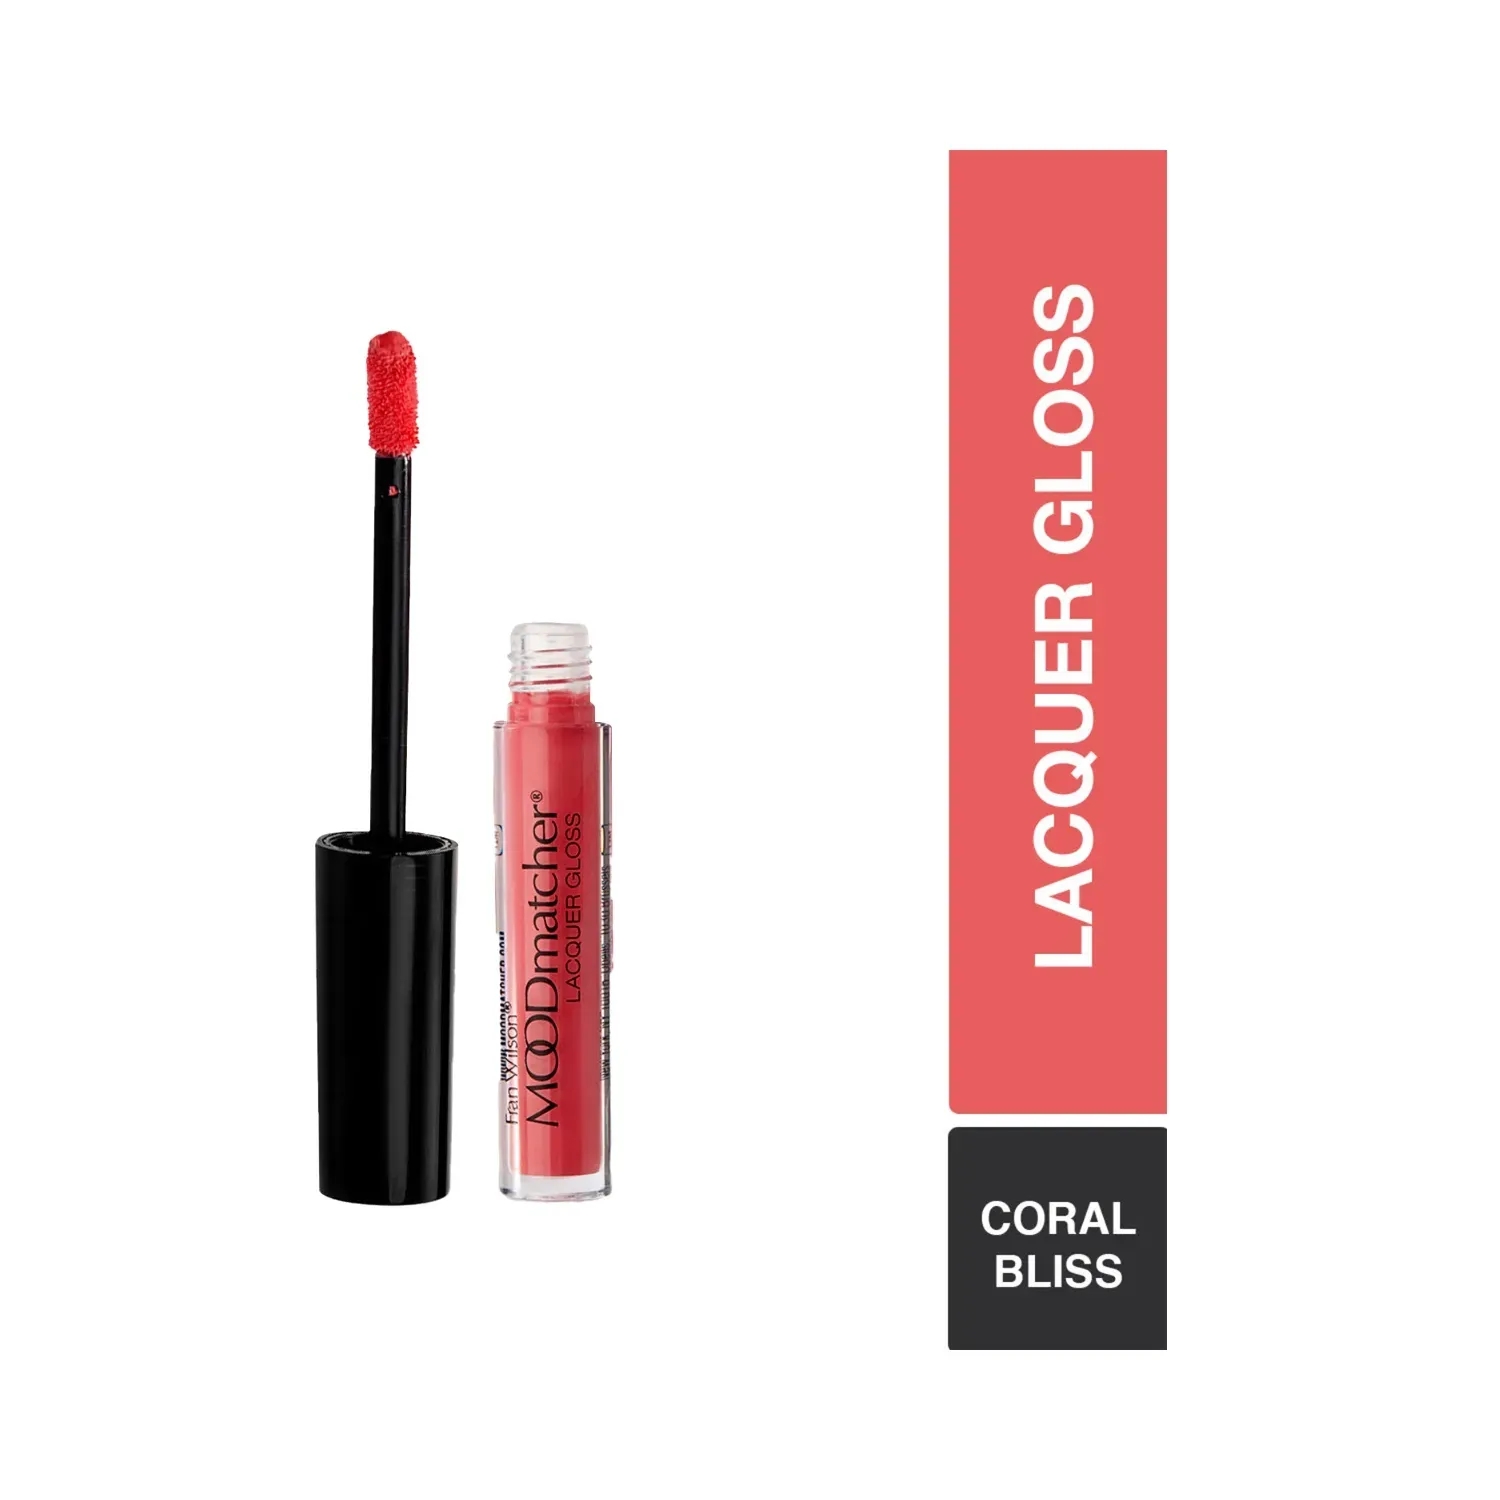 Fran Wilson Moodmatcher | Fran Wilson Moodmatcher Lacquer Lip Gloss - Coral Bliss (2ml)